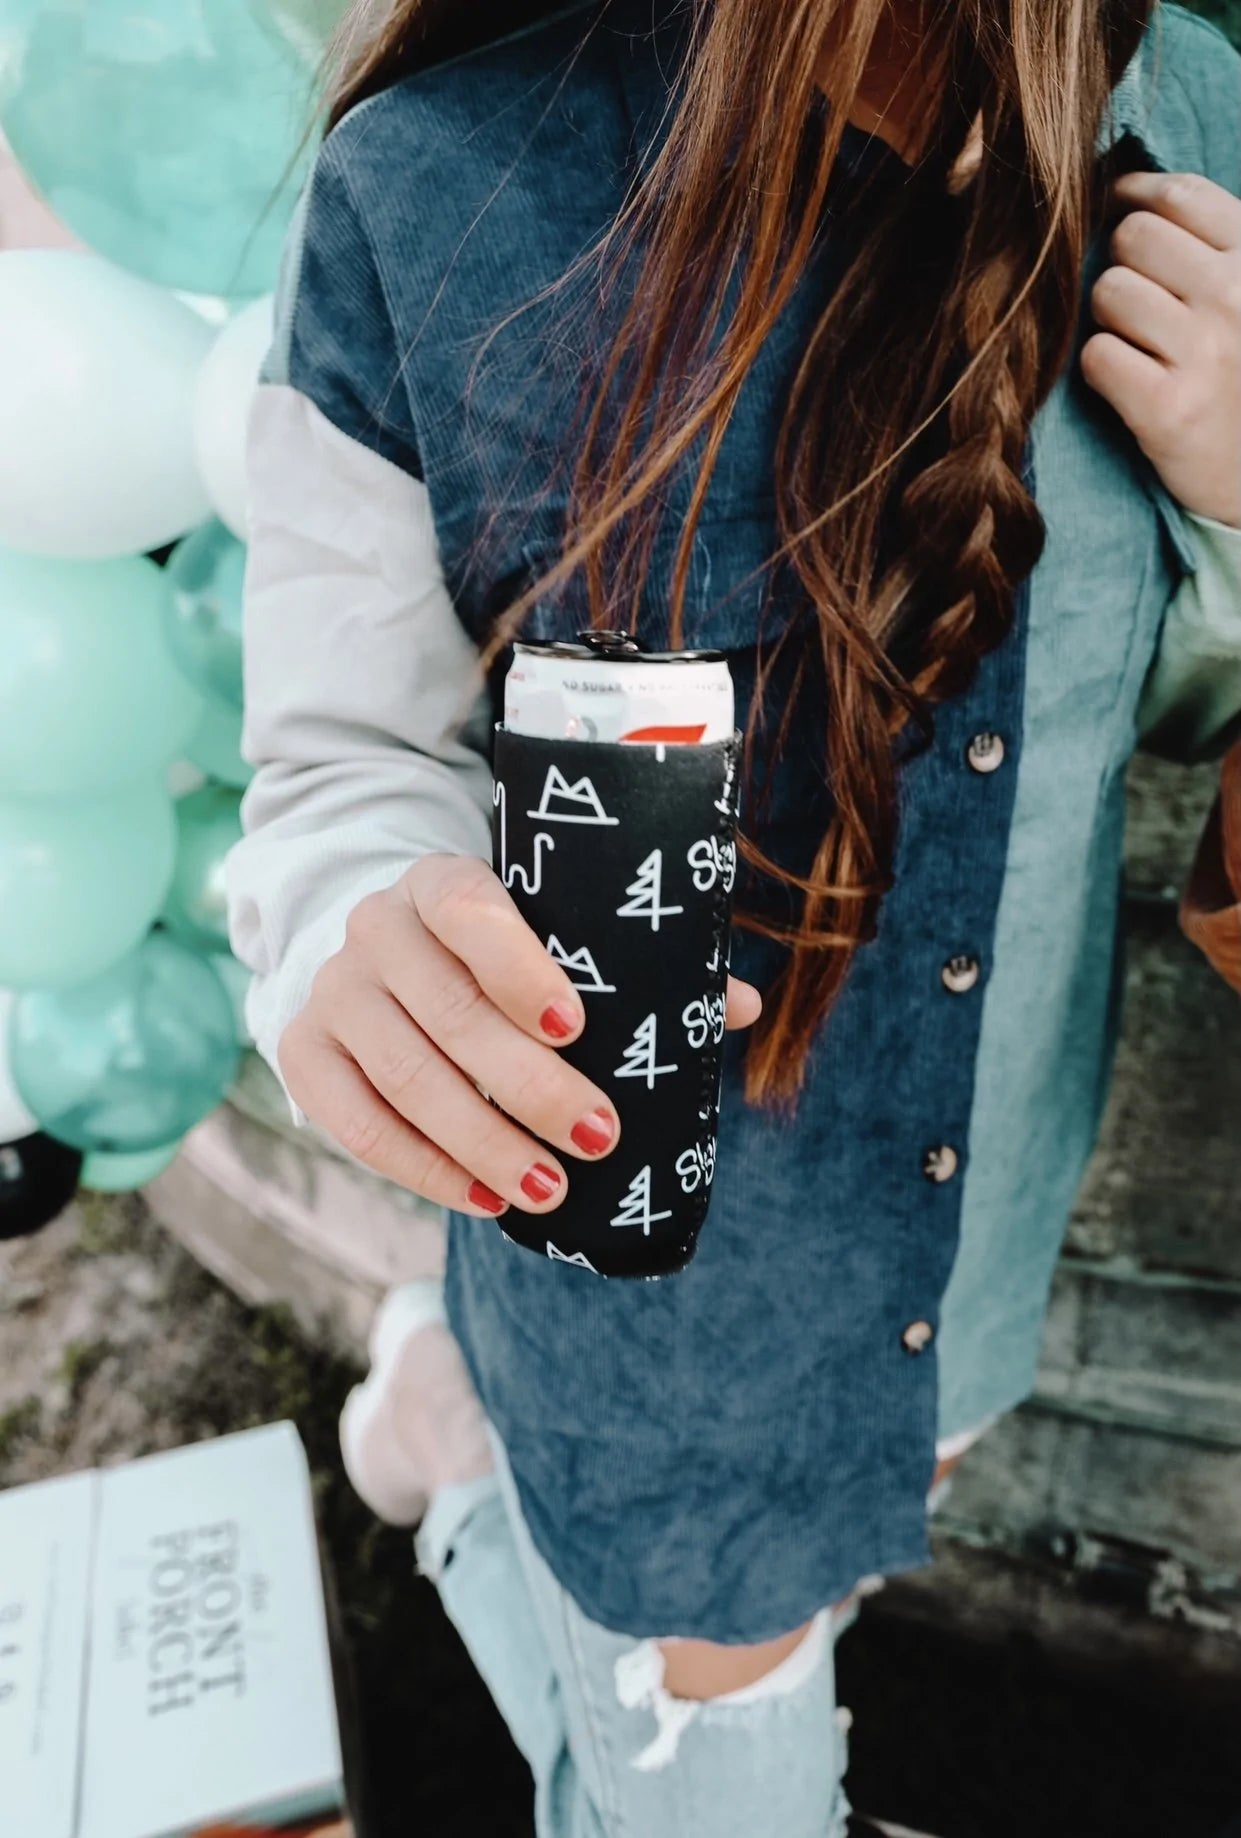 Black Set in Stone Koozie – The Merch Collective